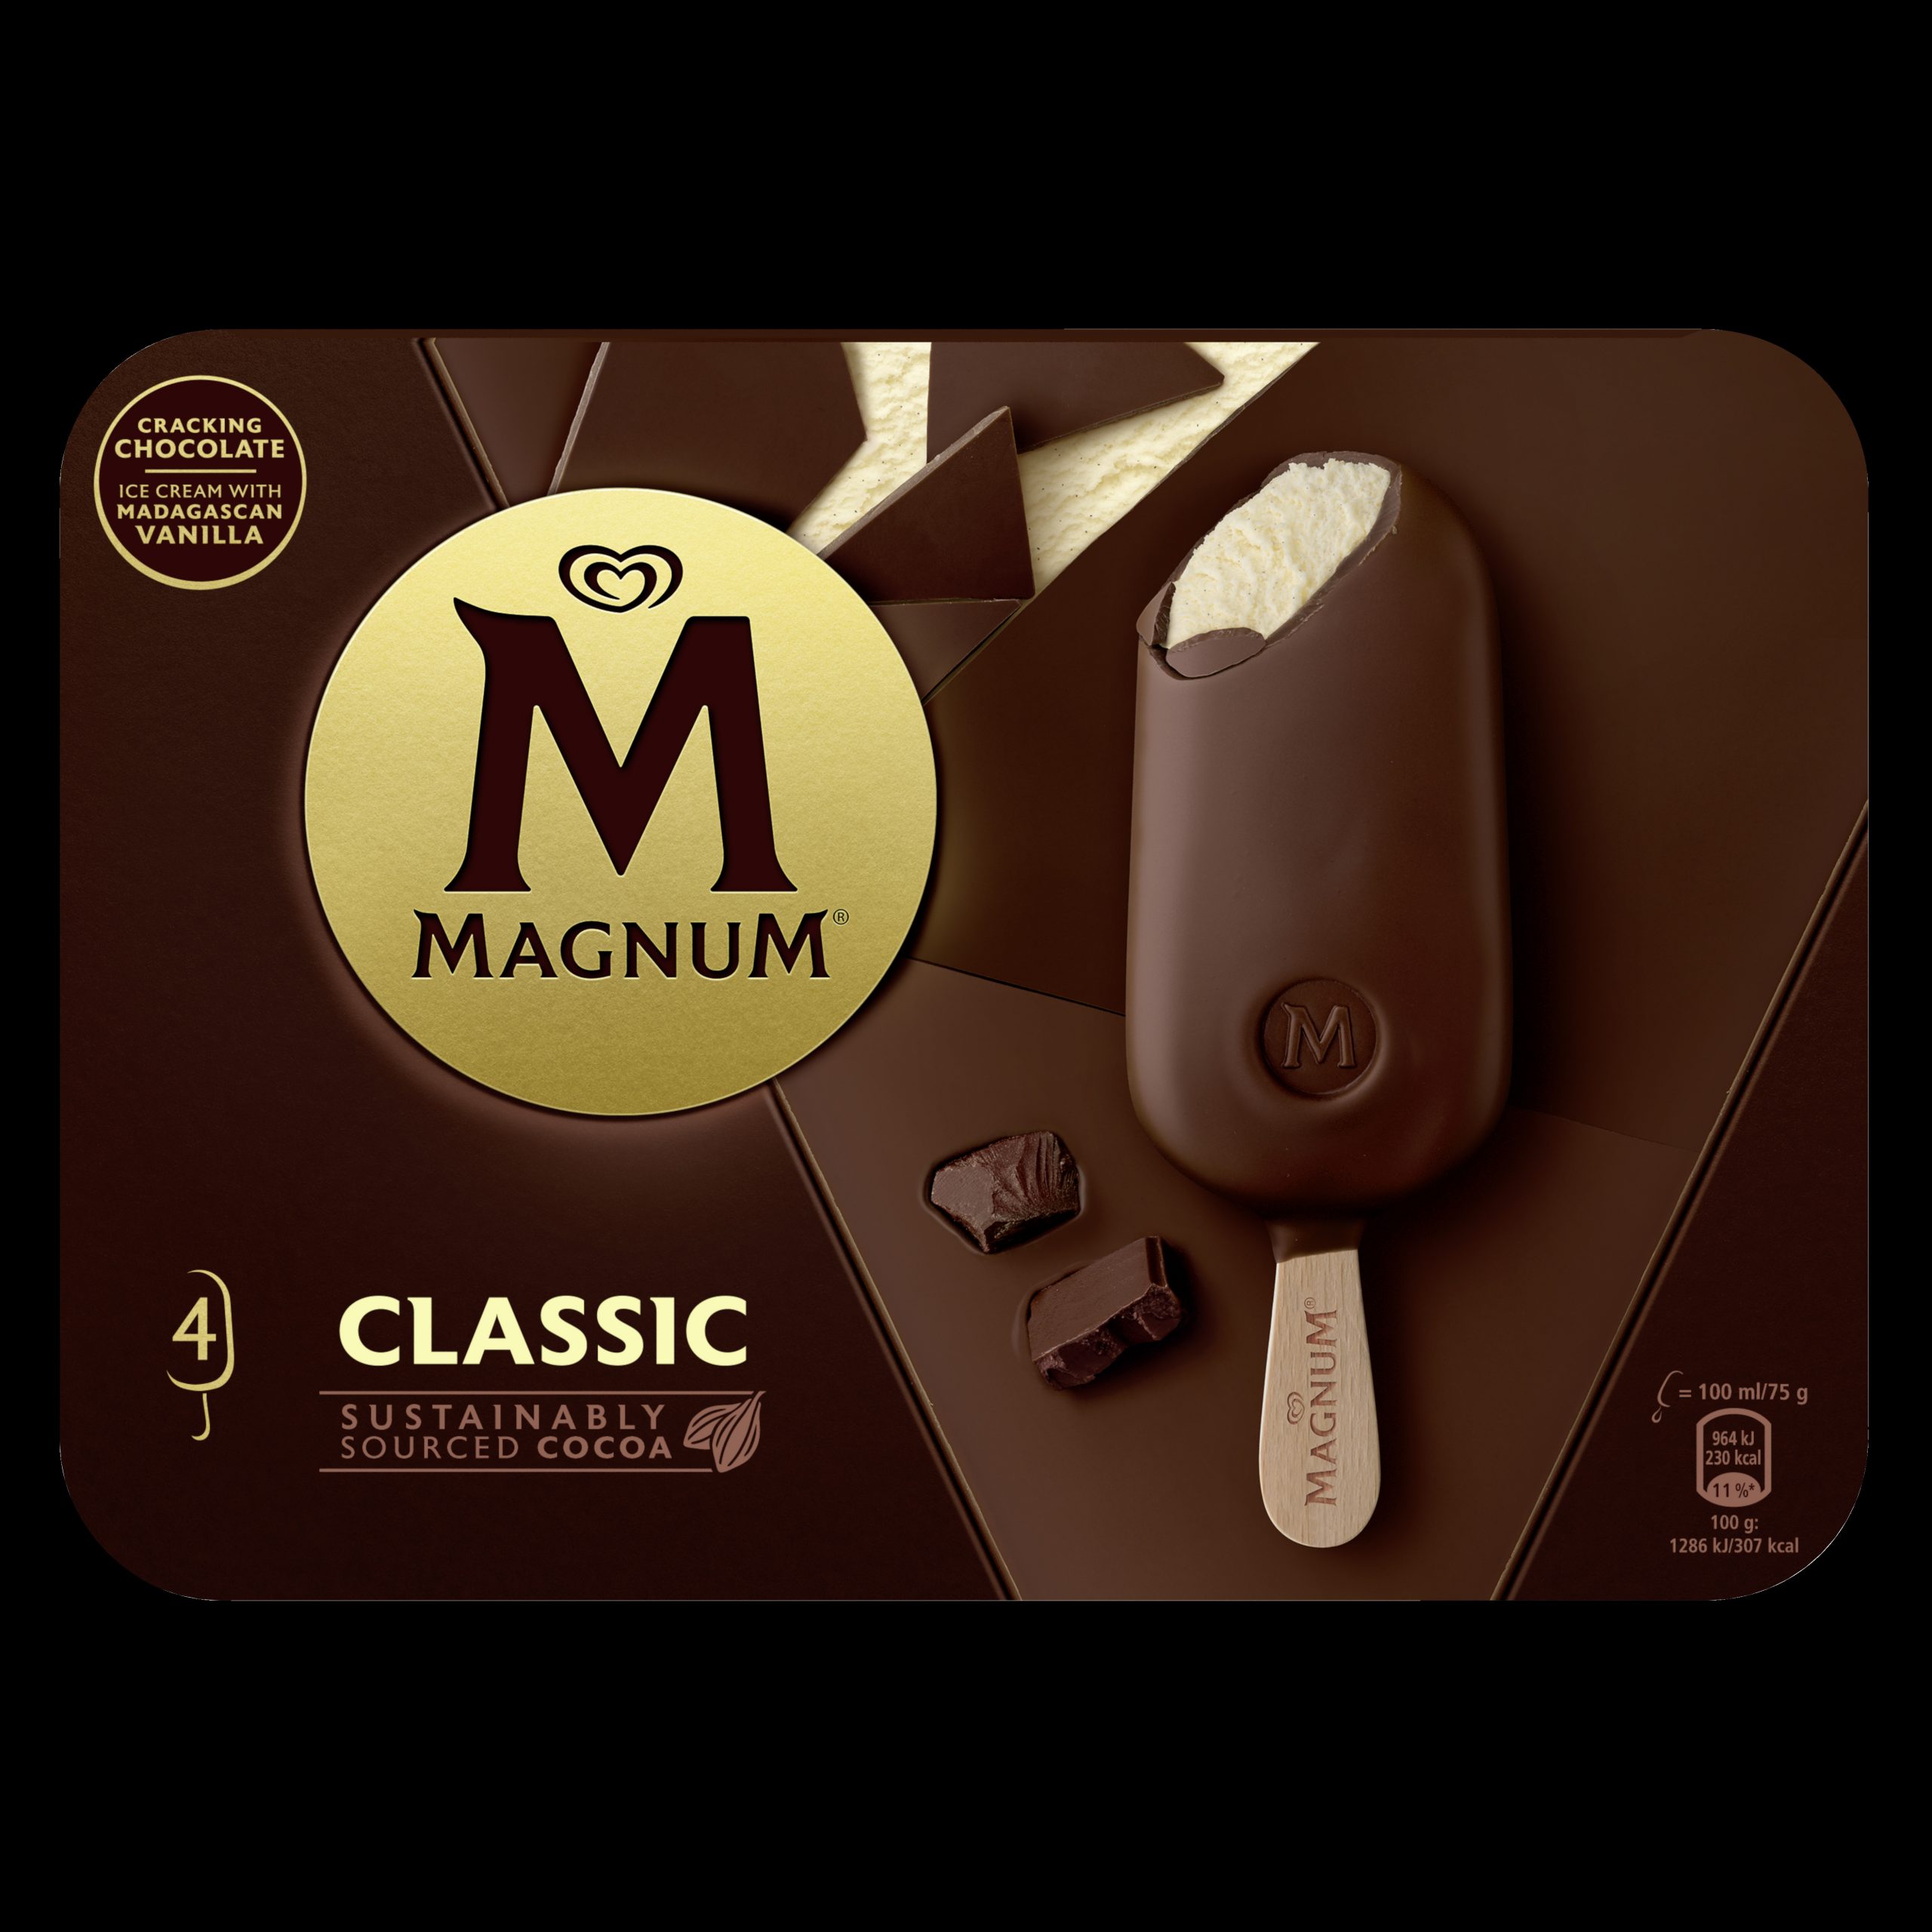 Magnum invests £10 million to support iconic Classics range relaunch